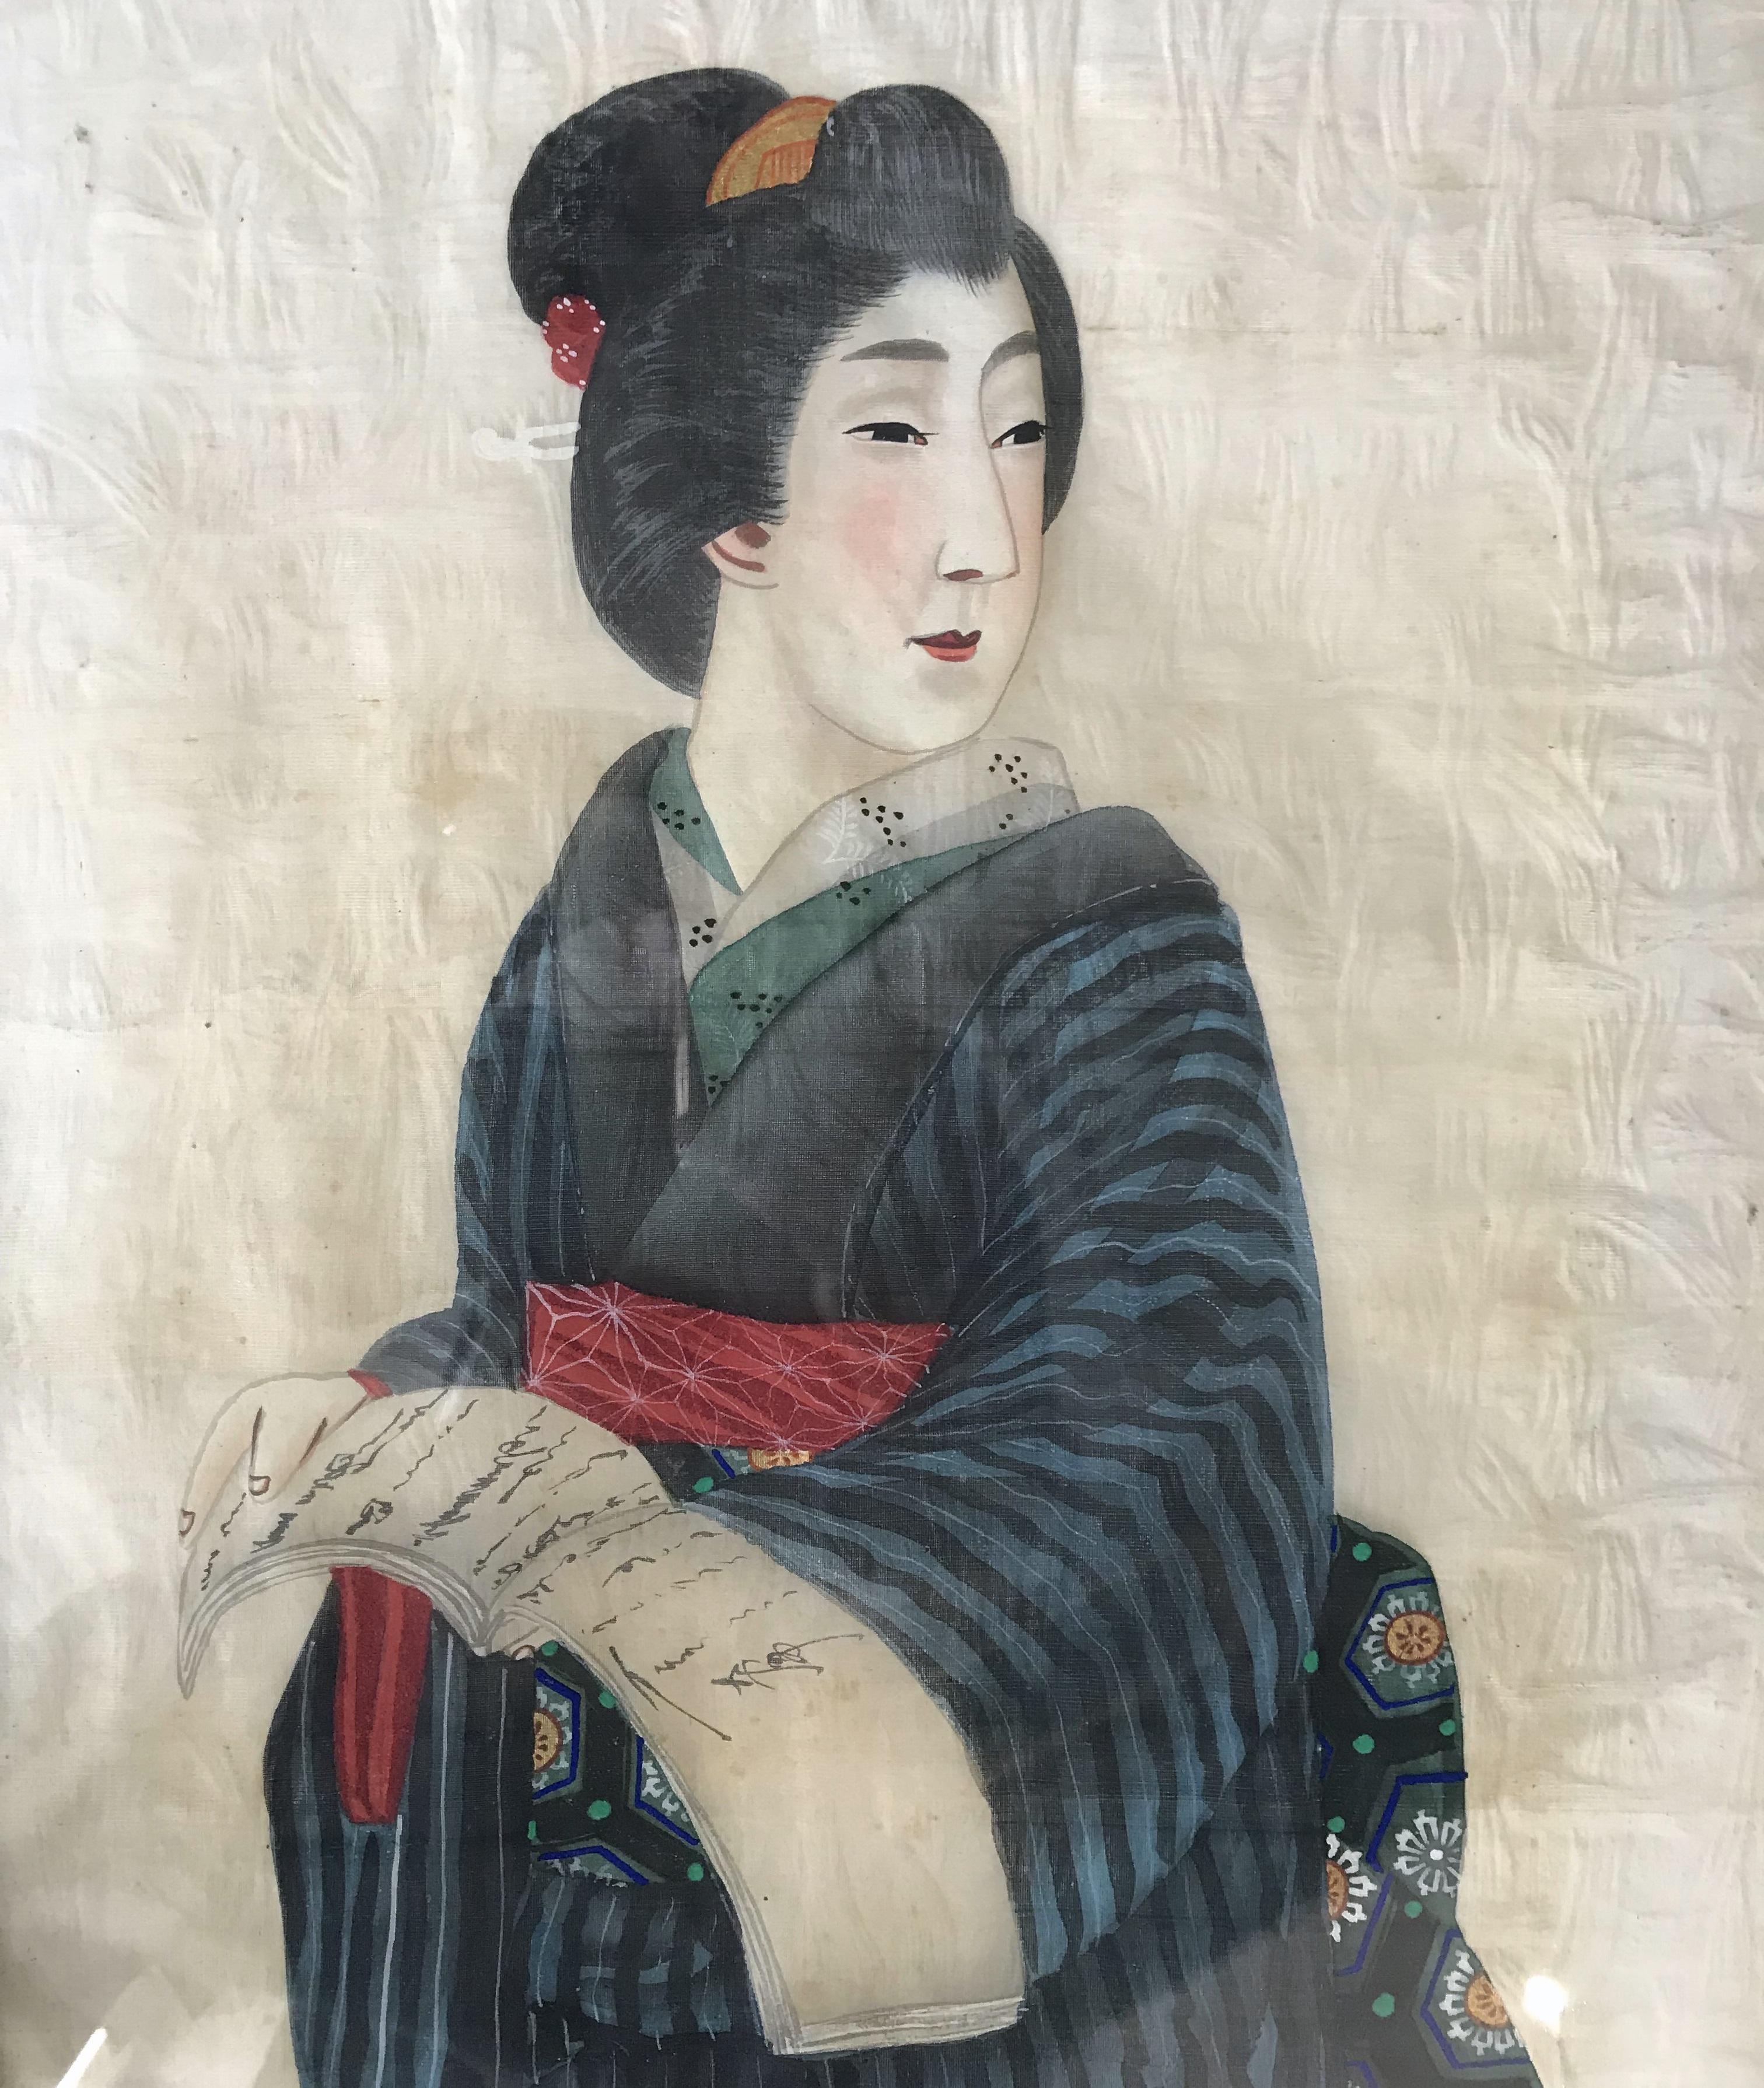 Two portraits of Japanese man and women in traditional costume painted on silk, circa 1920, in their original frames. Details show the exquisite traditional clothing in Japan of its time.
They are priced and sold as a set of two.